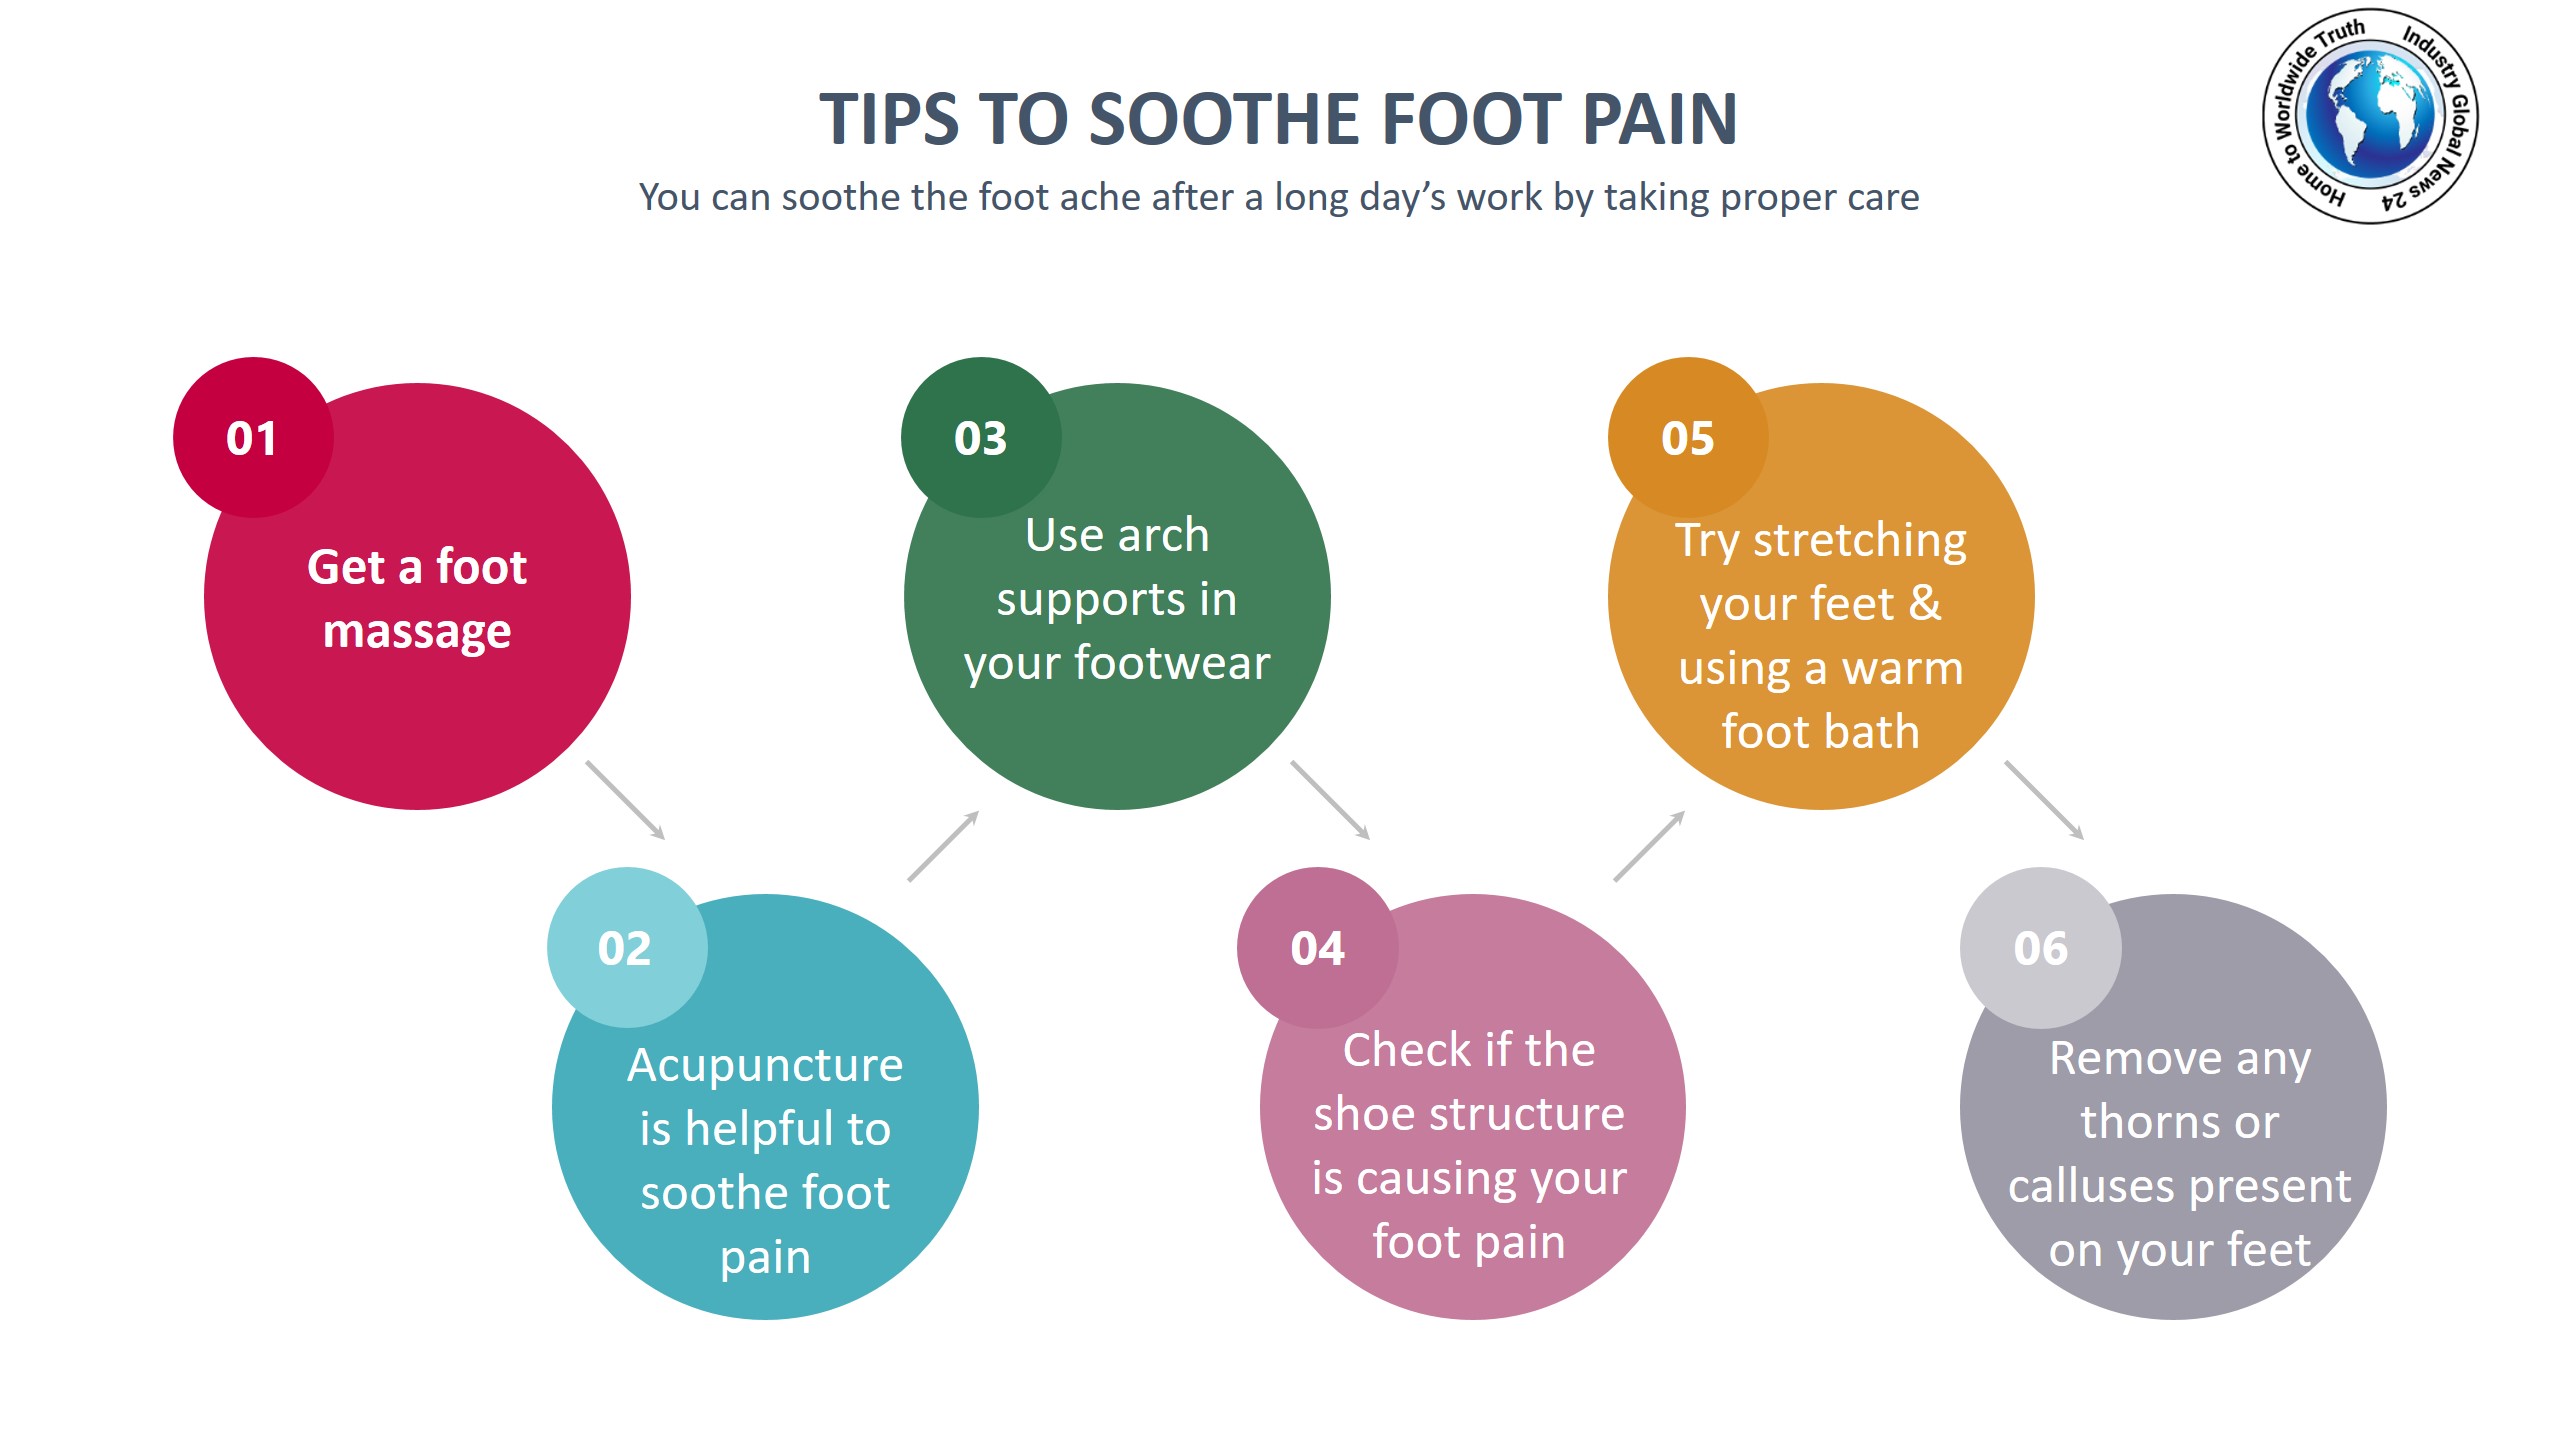 Tips to soothe foot pain